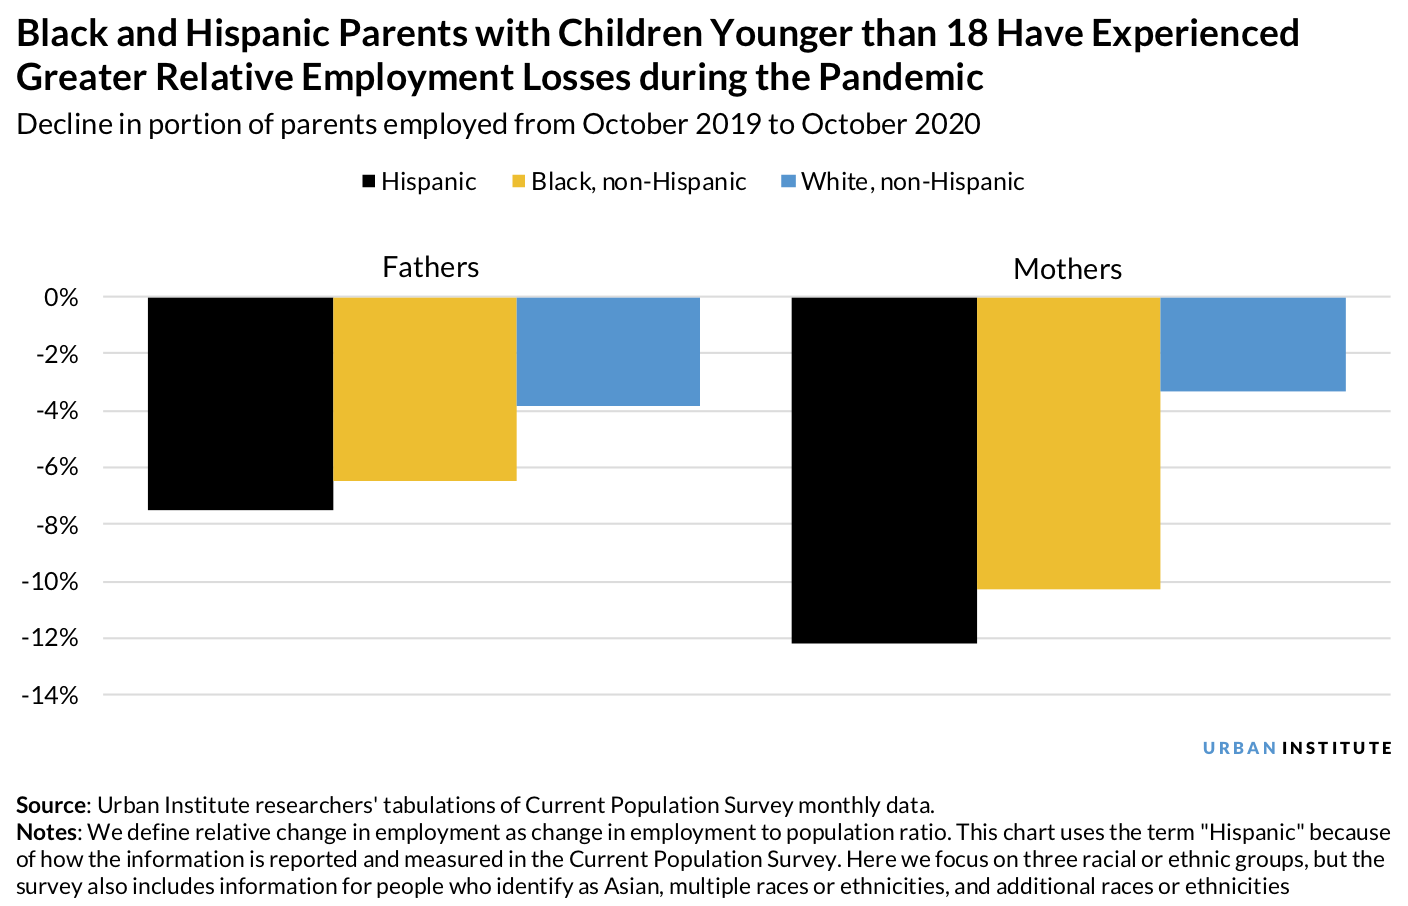 Bar chart showing Black and Hispanic parents with kids younger than 18 have expereinced greater relative employment losses